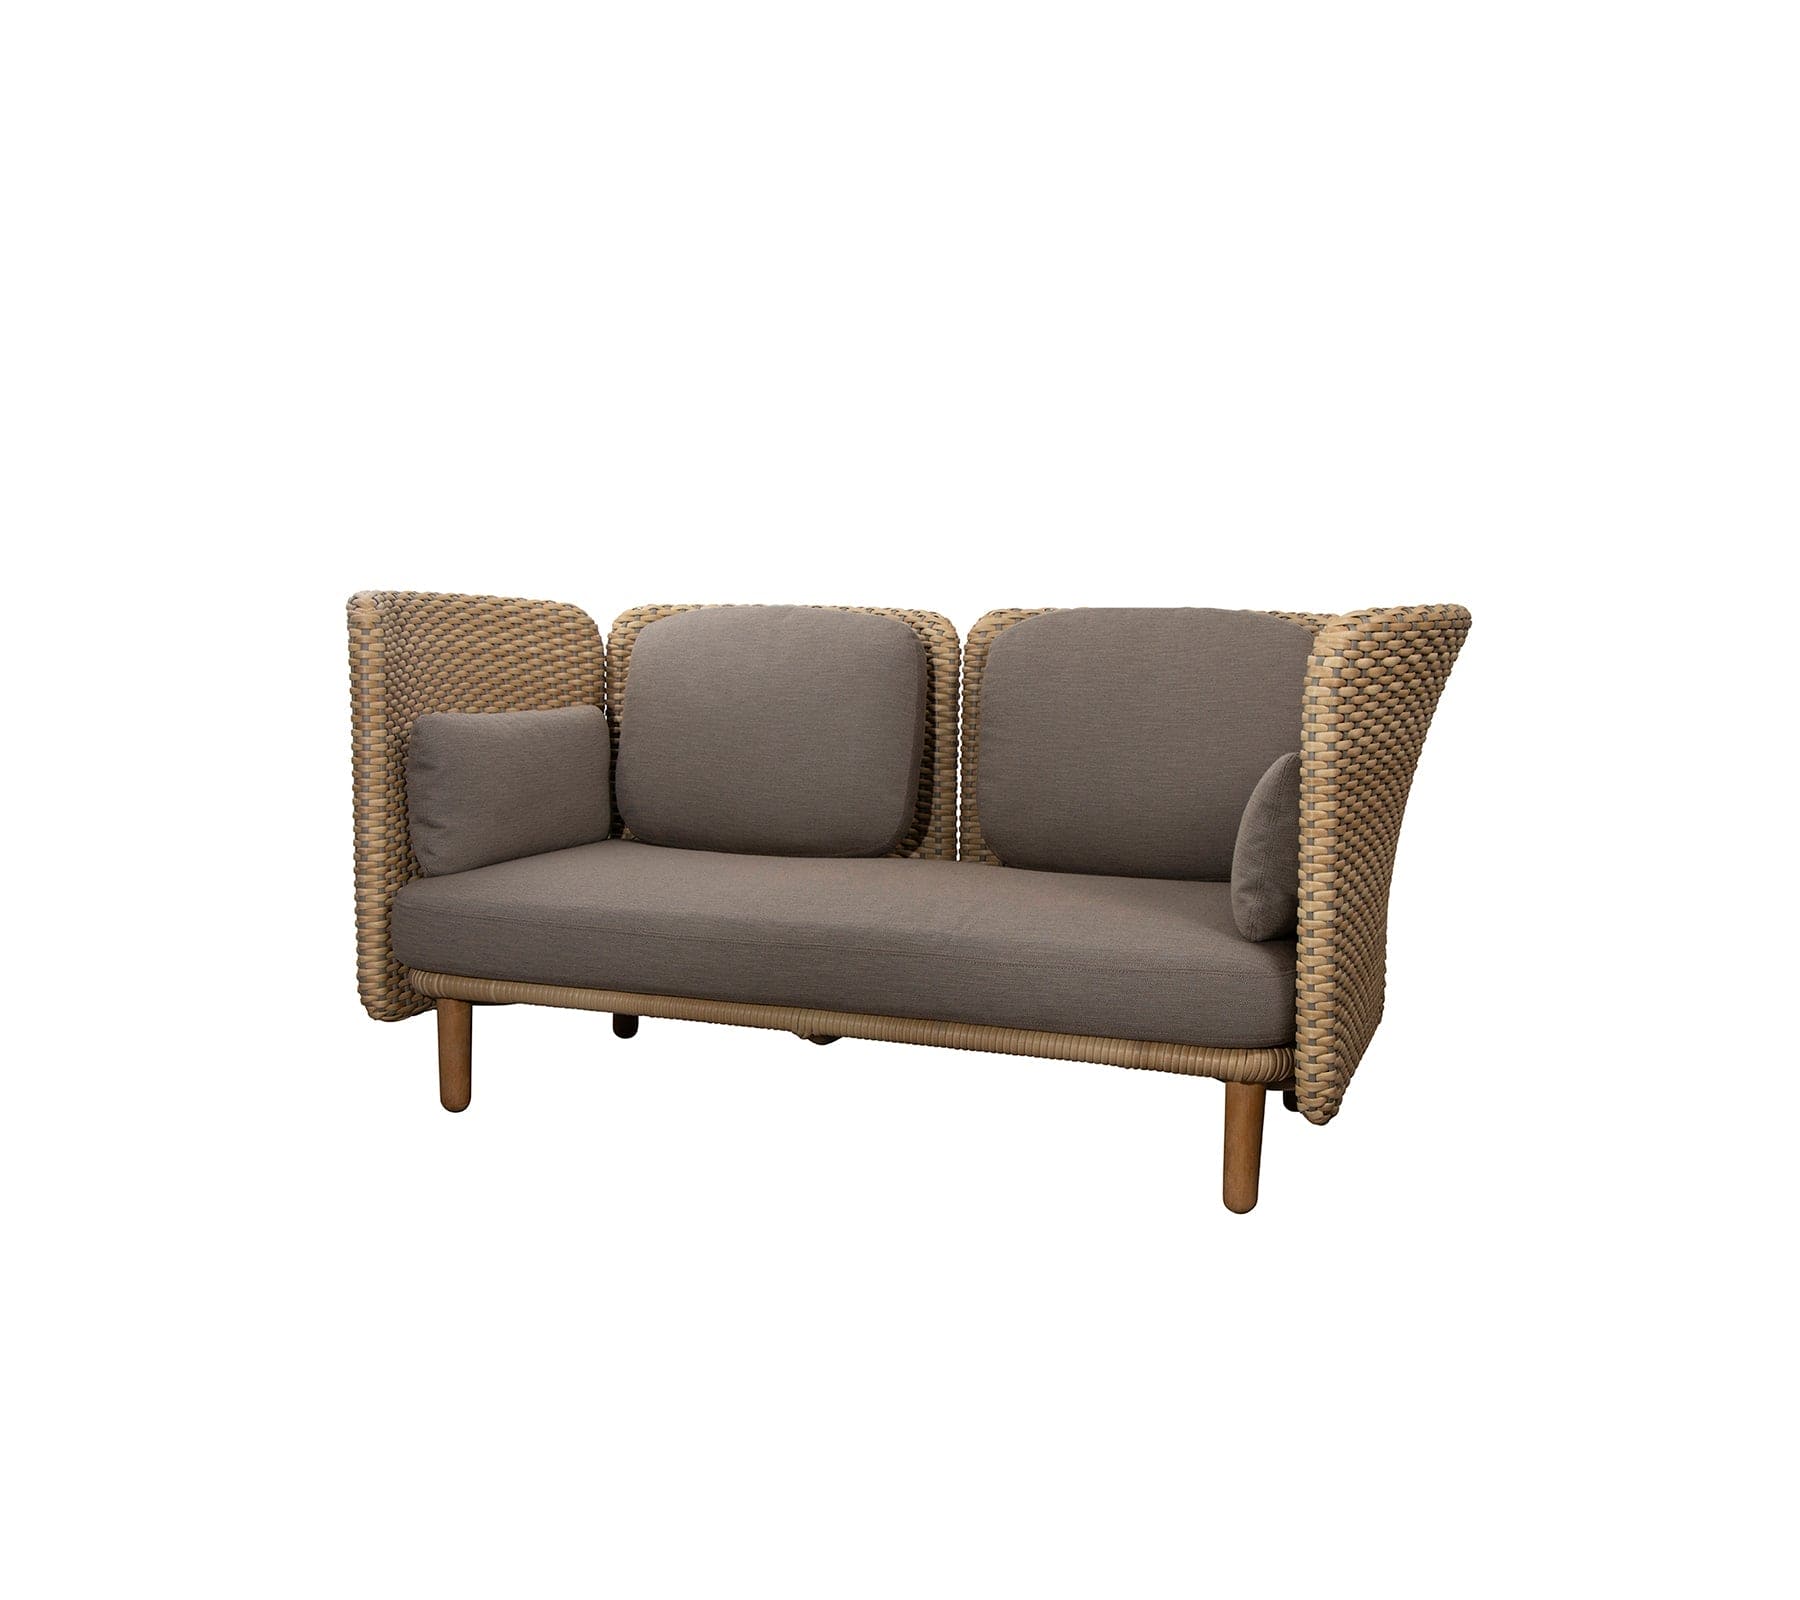 Boxhill's Arch 2-Seater Outdoor Sofa | Low Arm/Back in white background